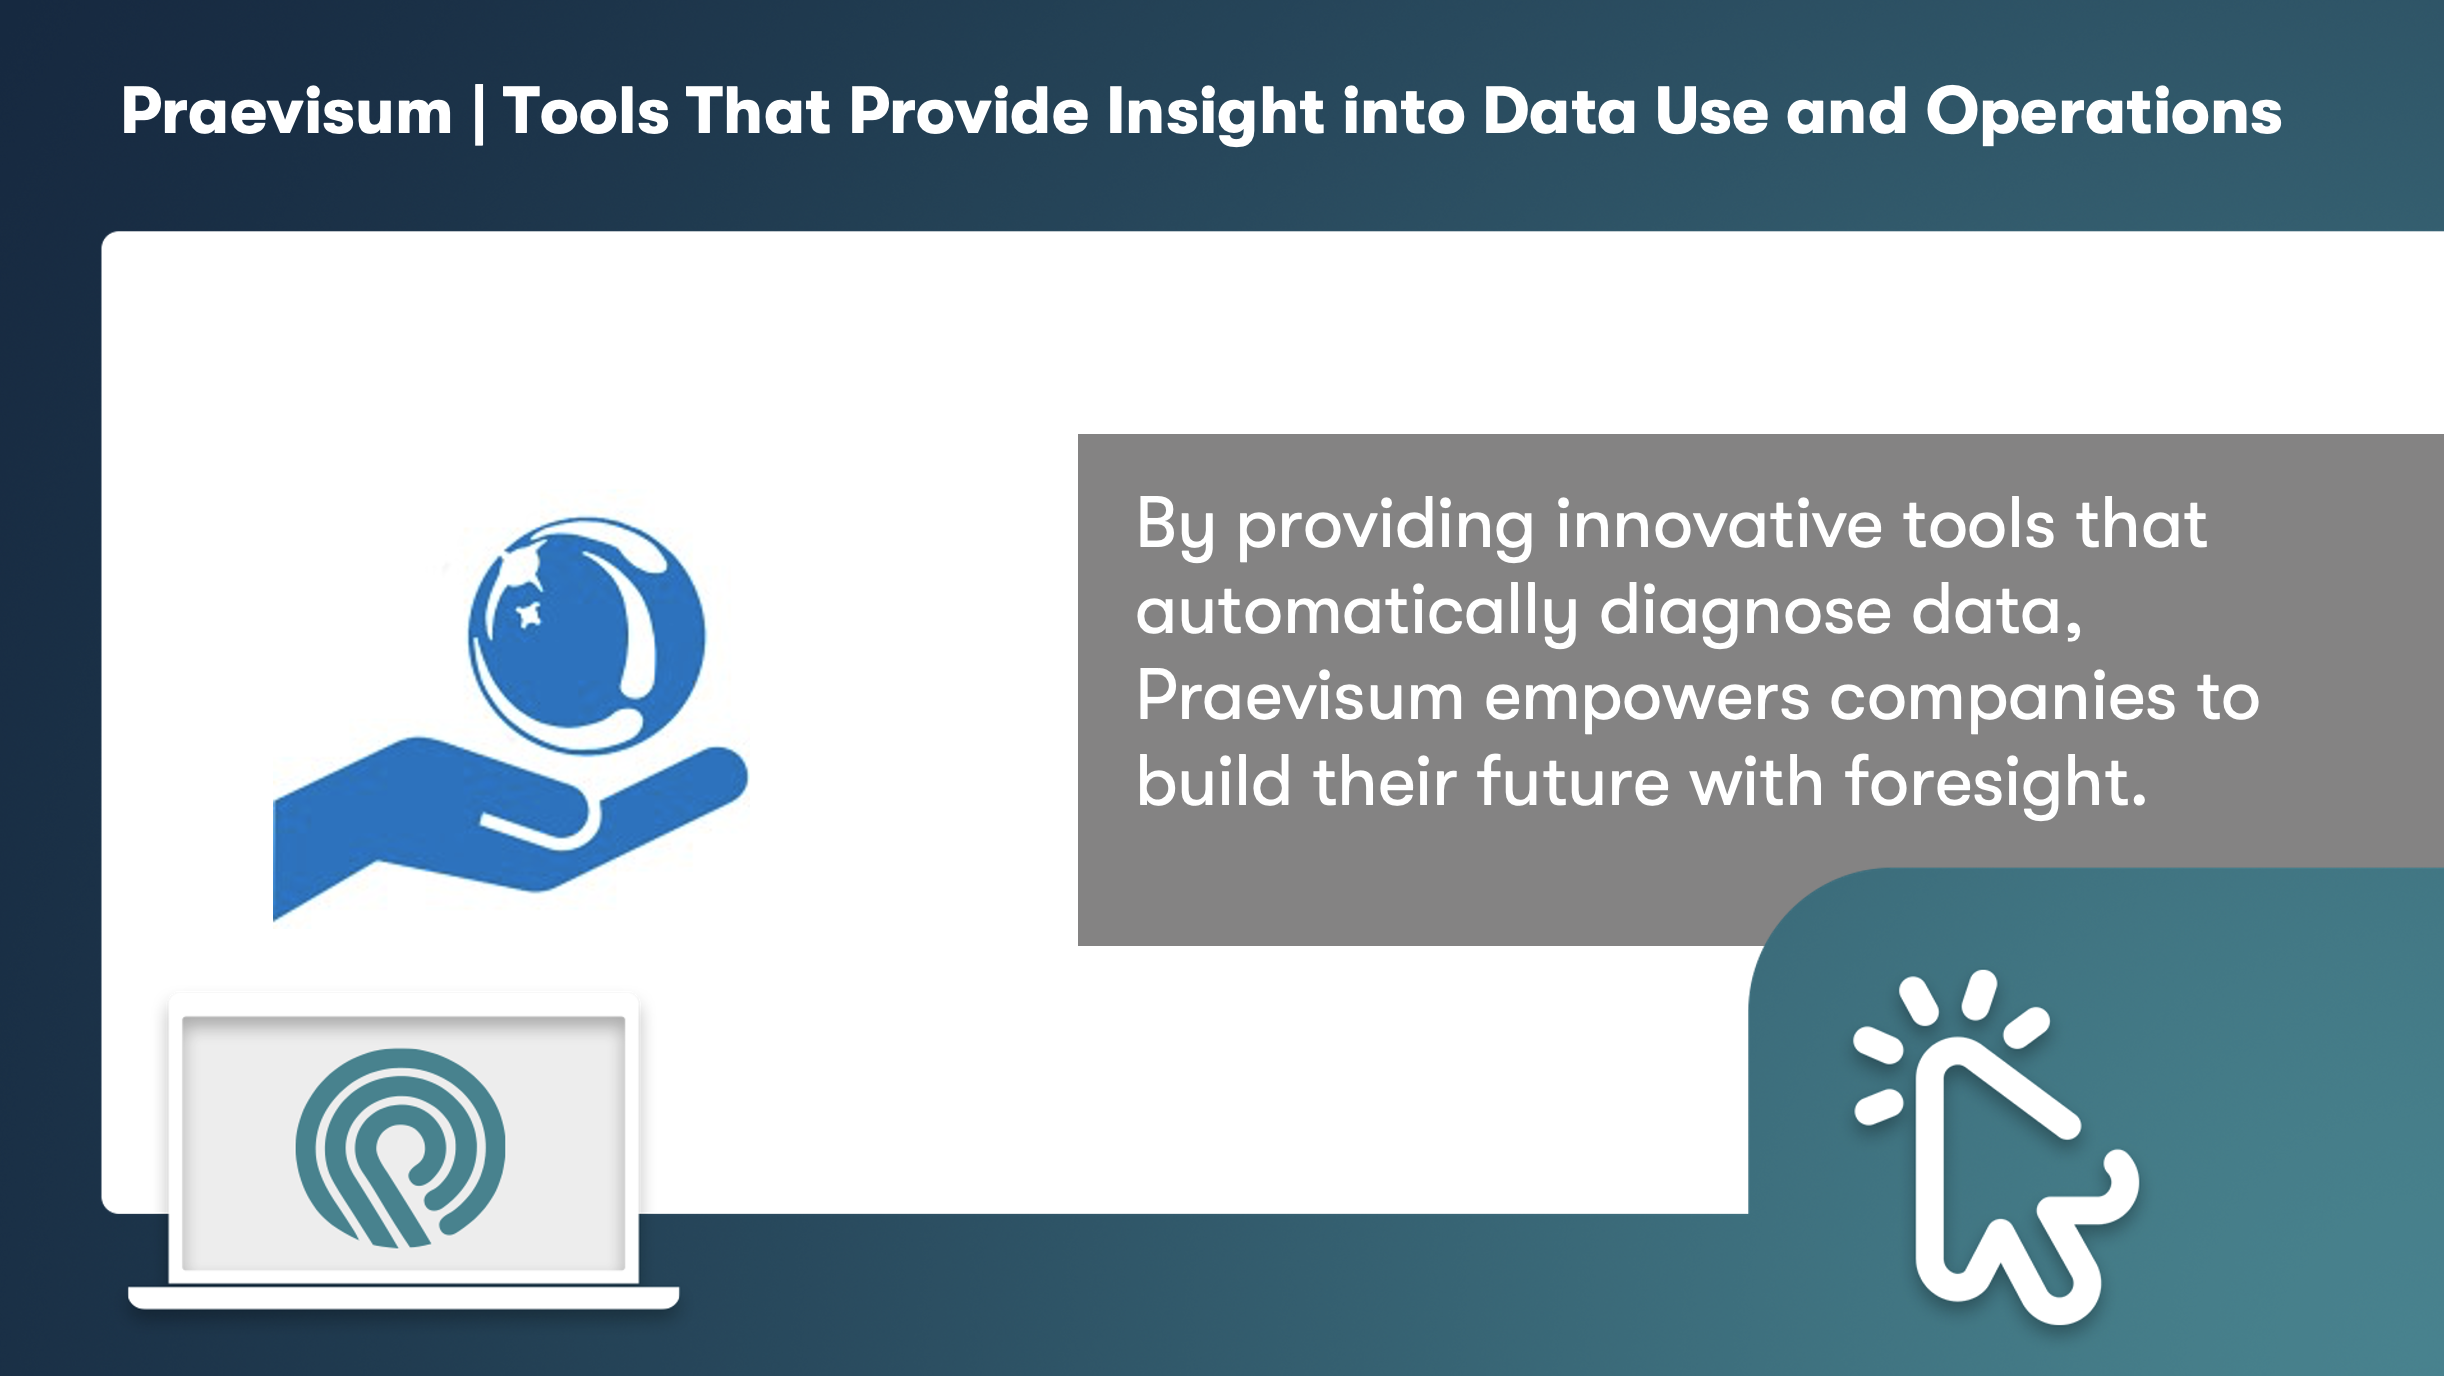 Praevisum | Tools That Provide Insight into Data Use and Operations